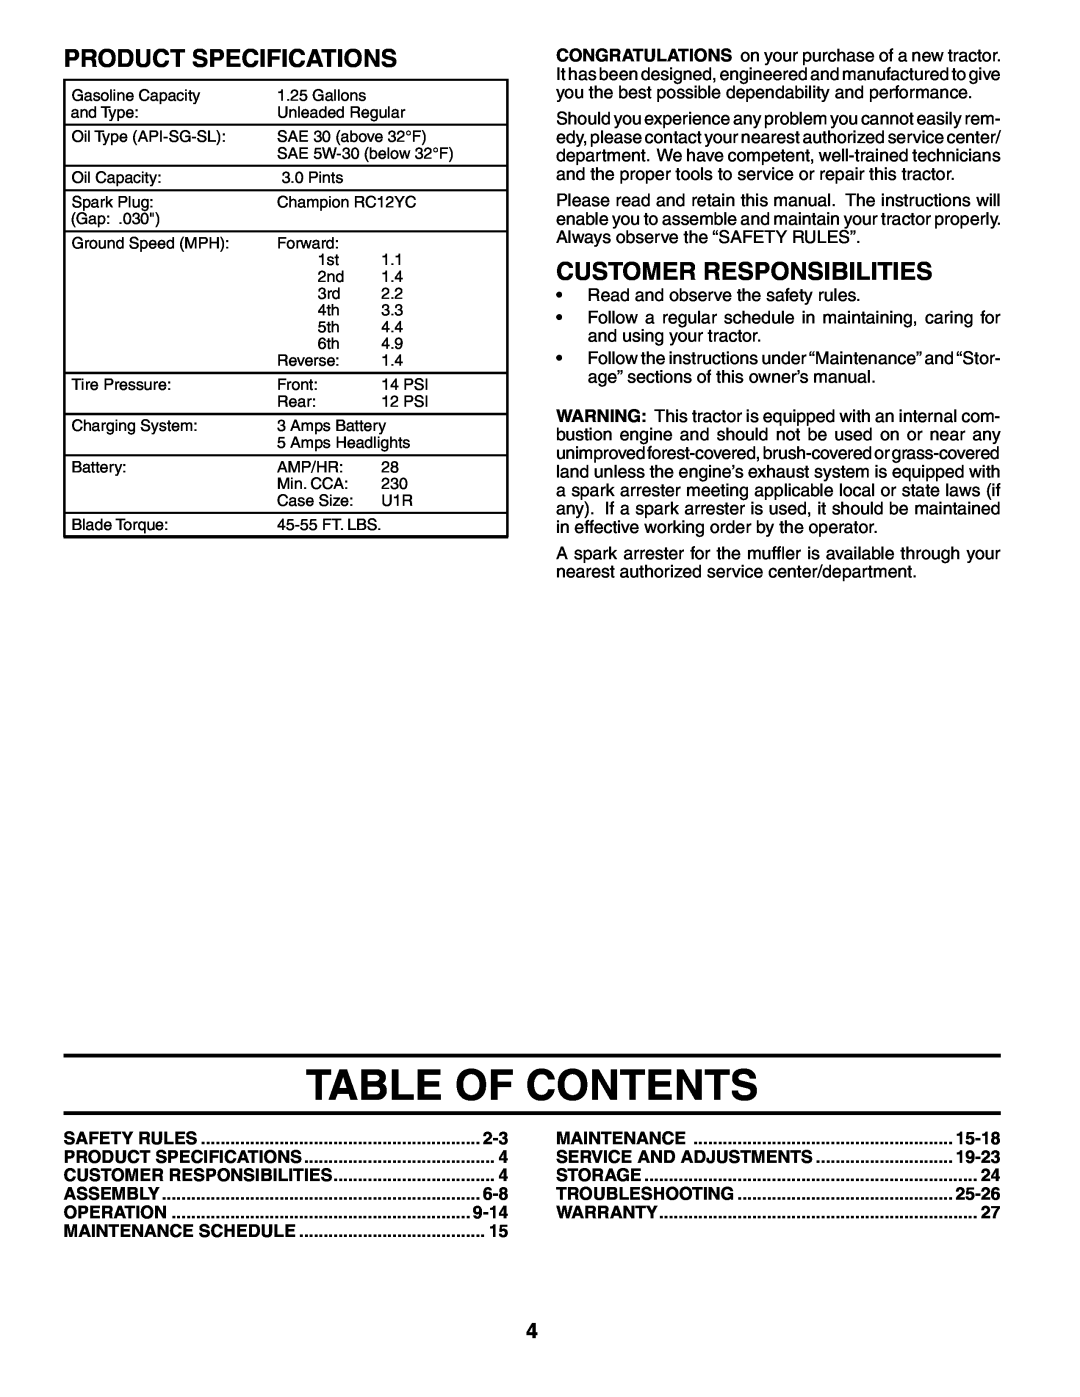 Weed Eater 403284, 96016001400 manual Table Of Contents, Product Specifications, Customer Responsibilities 